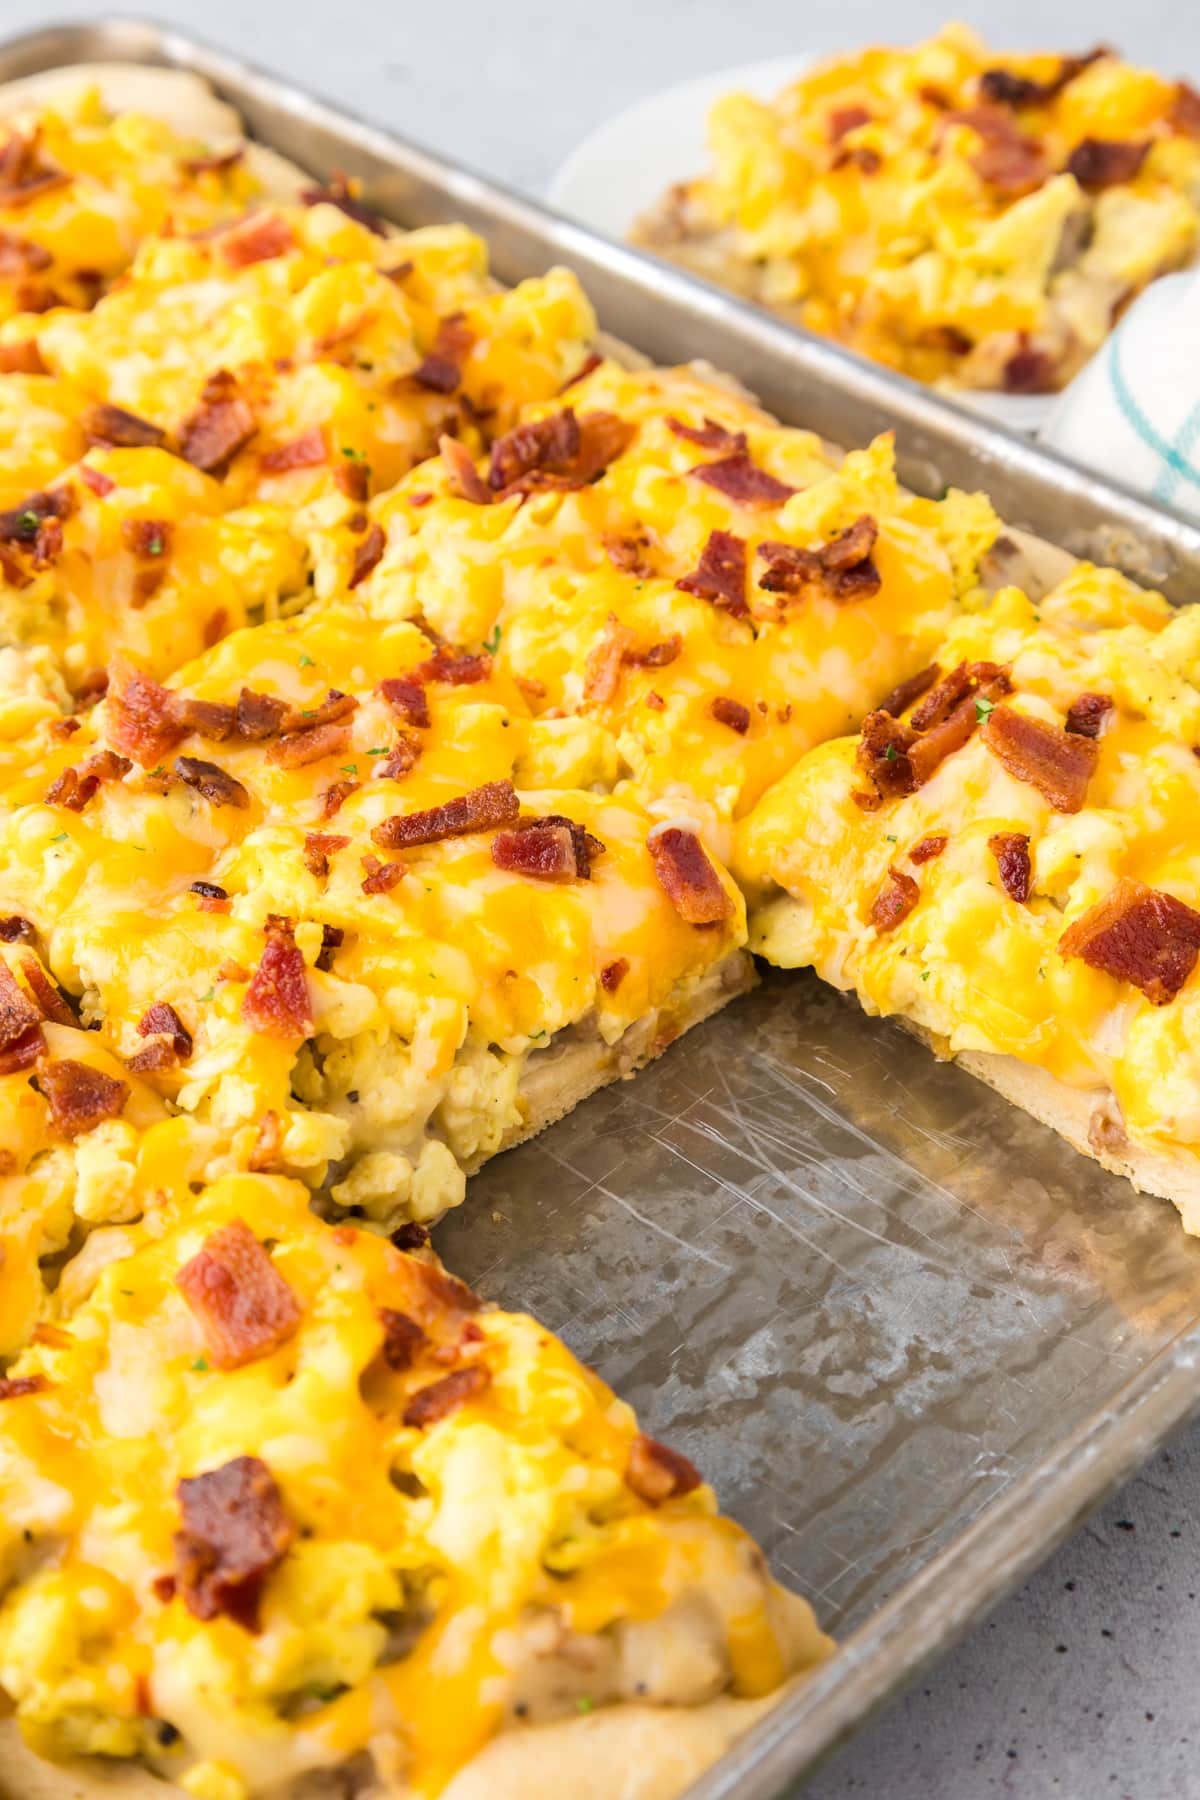 Breakfast pizza cut into square servings in a baking sheet.